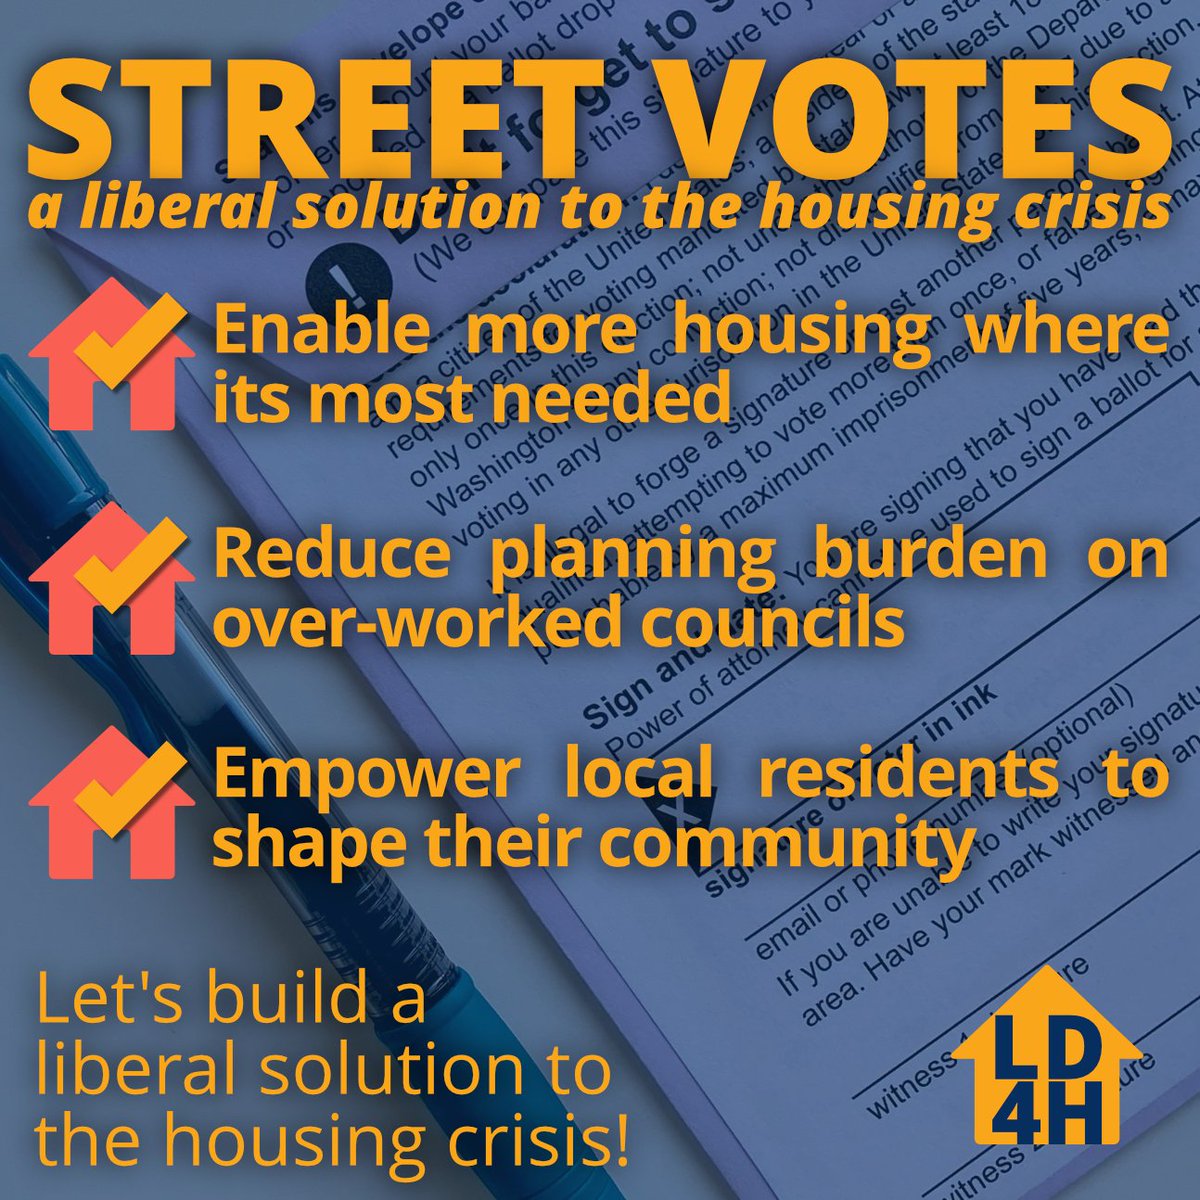 We need bold and innovative ideas to solve the housing crisis. Street votes are an exciting new idea that brings people together to build the houses we desperately need! Find out more 👉 libhousing.com/street-votes/